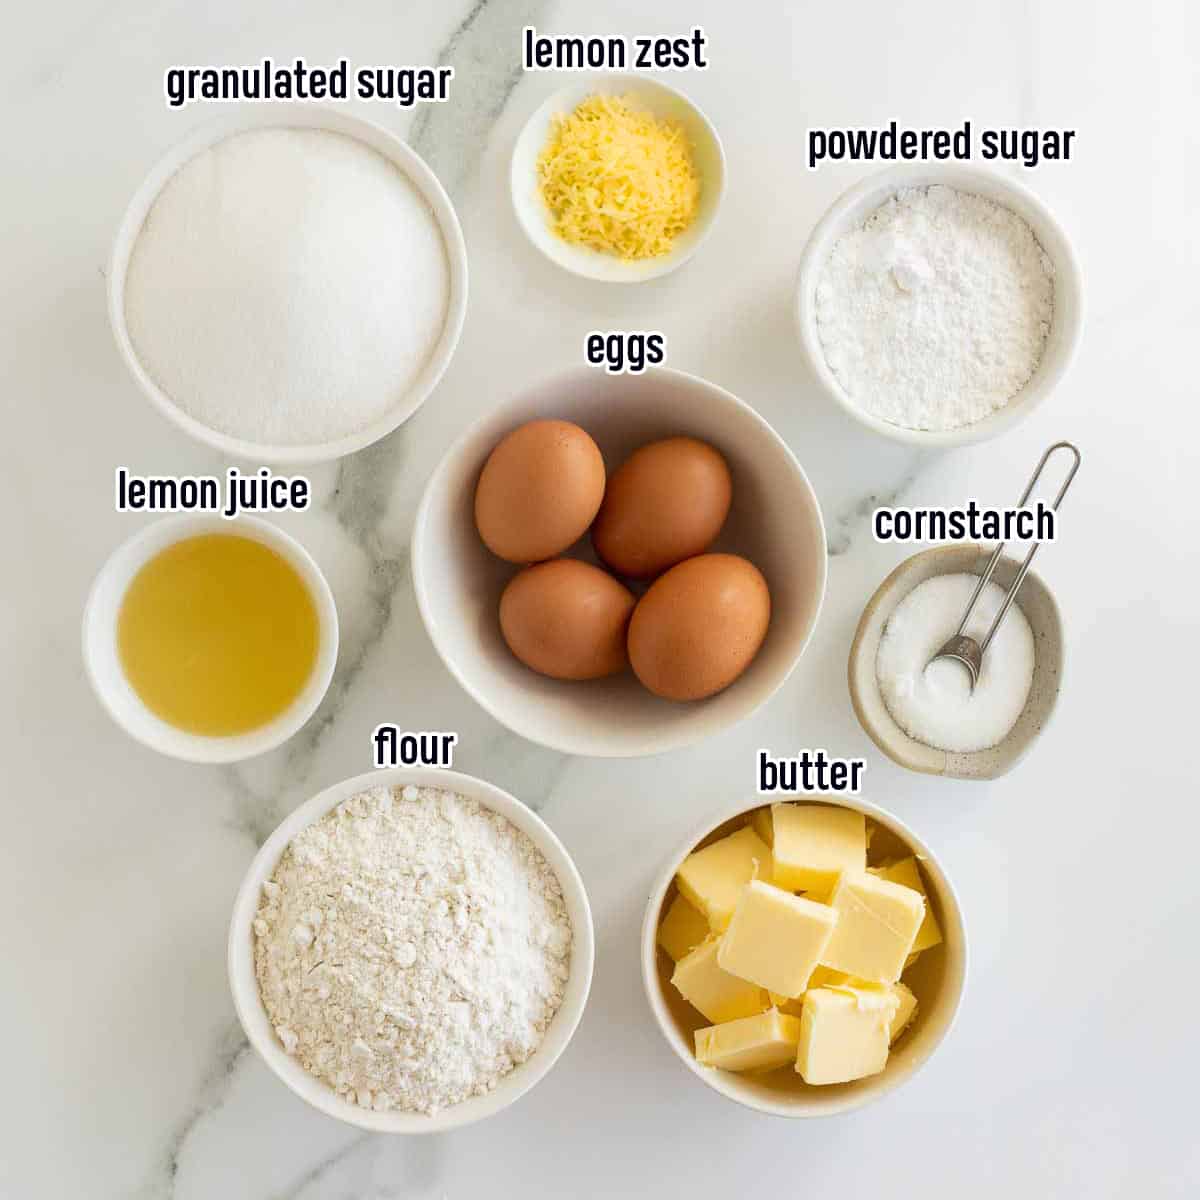 Lemon zest, lemon juice, eggs and other ingredients for lemon bars in bowls with text.